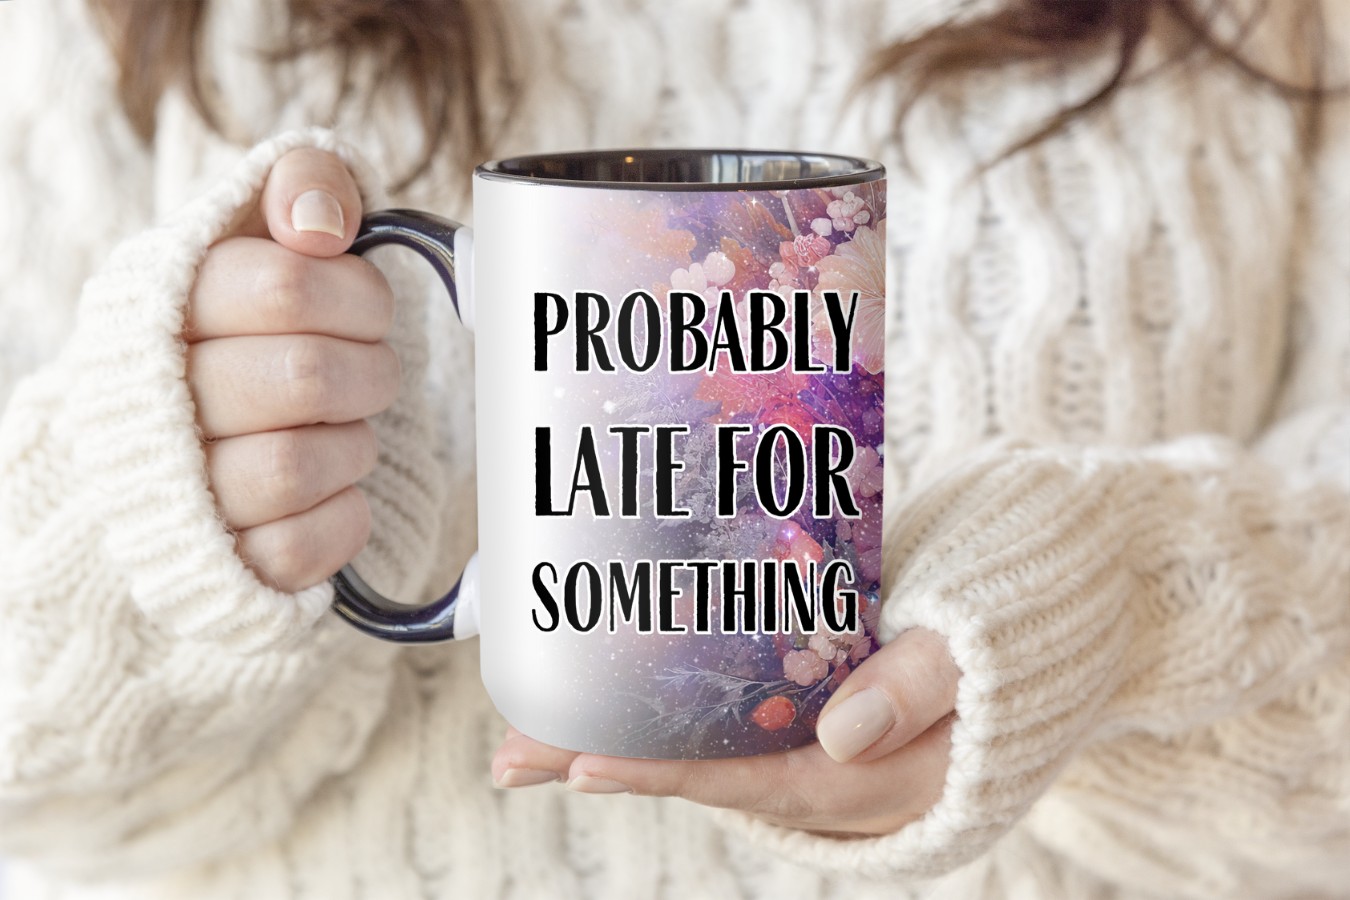 Probably Late For Something | Mug - The Pretty Things.ca